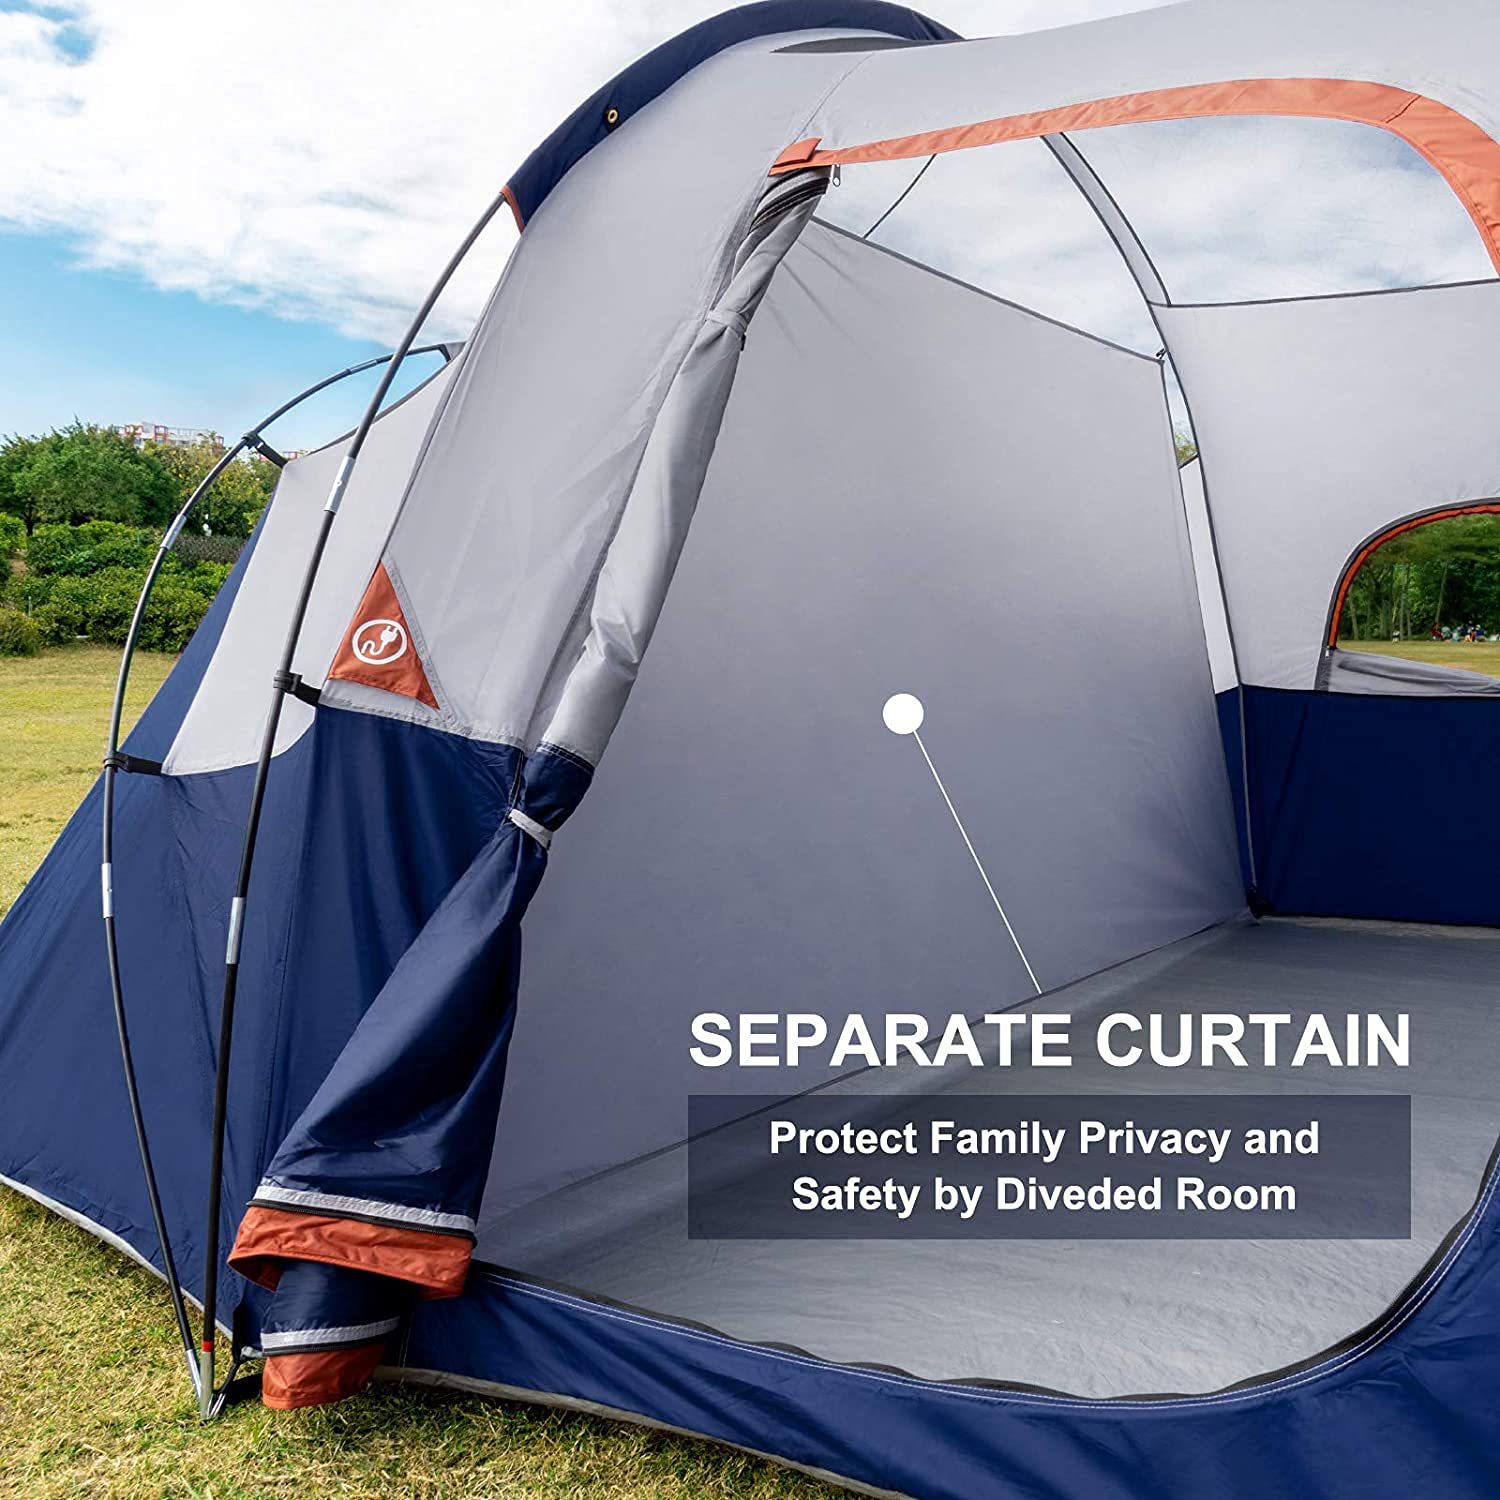 Tent-8-Person-Camping-Tents, Waterproof Windproof Family Tent, 5 ka Dagko nga Mesh Windows, Doble nga Layer, Divided Curtain para sa Separated Room, Portable with Carry Bag